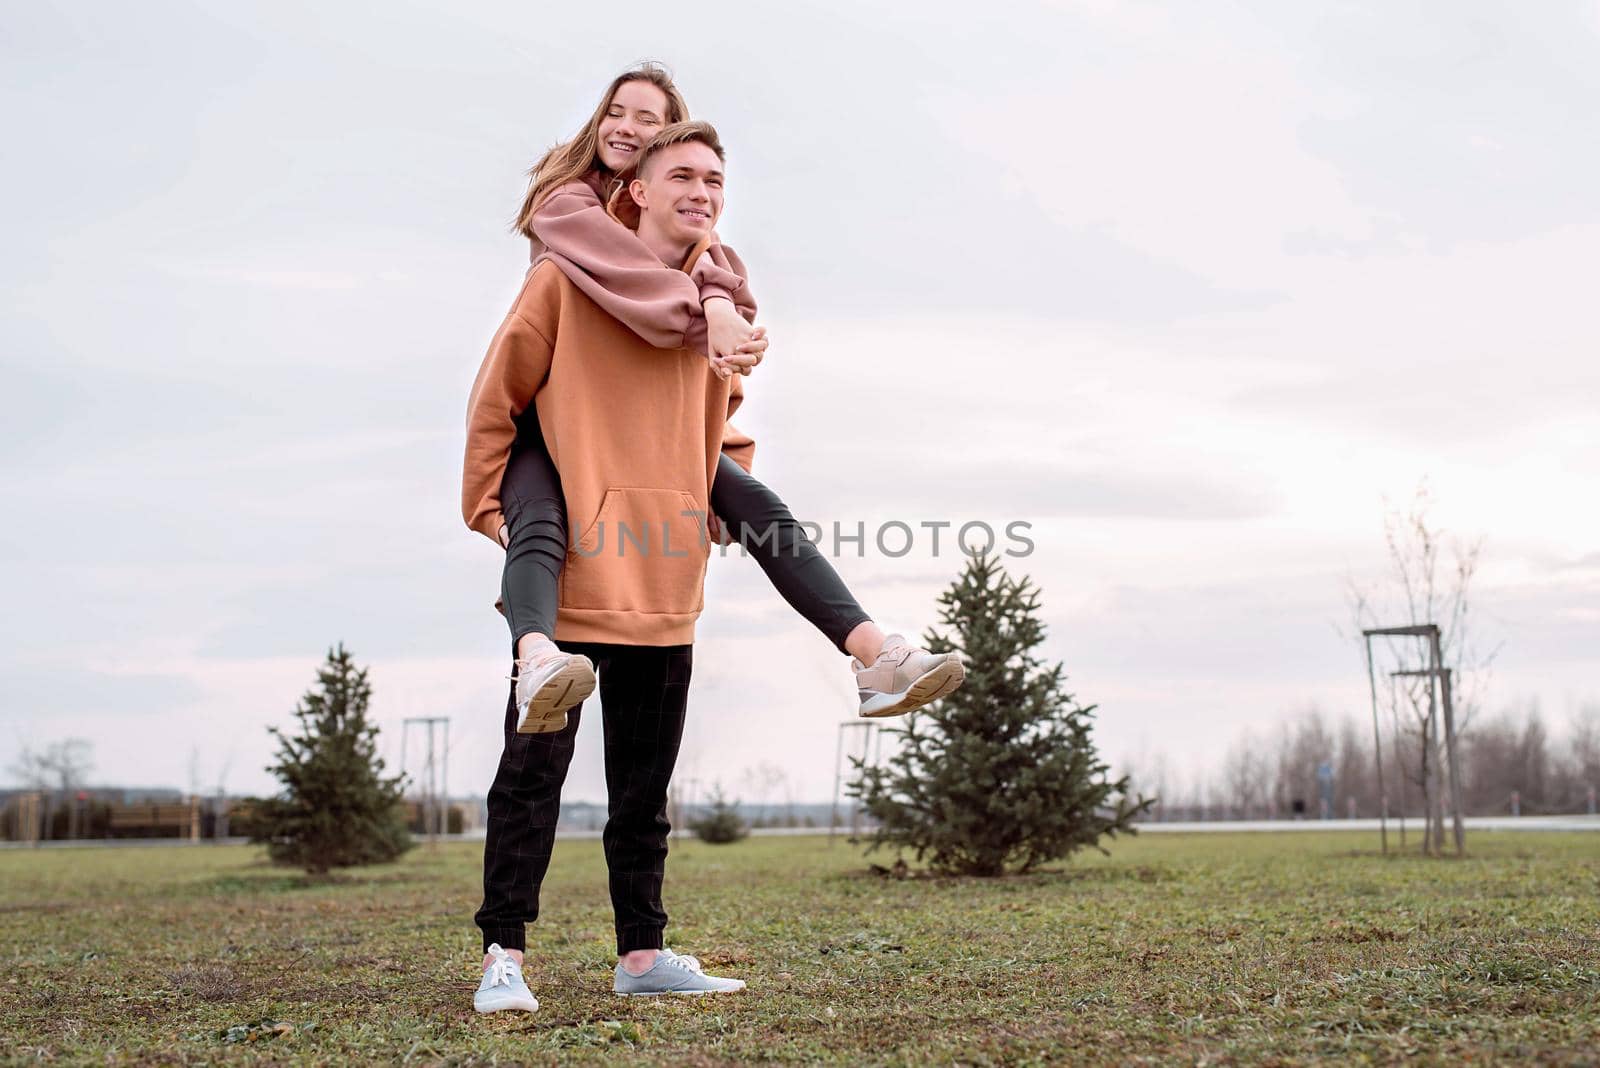 Happy young loving couple wearing hoods embracing each other outdoors in the park having fun